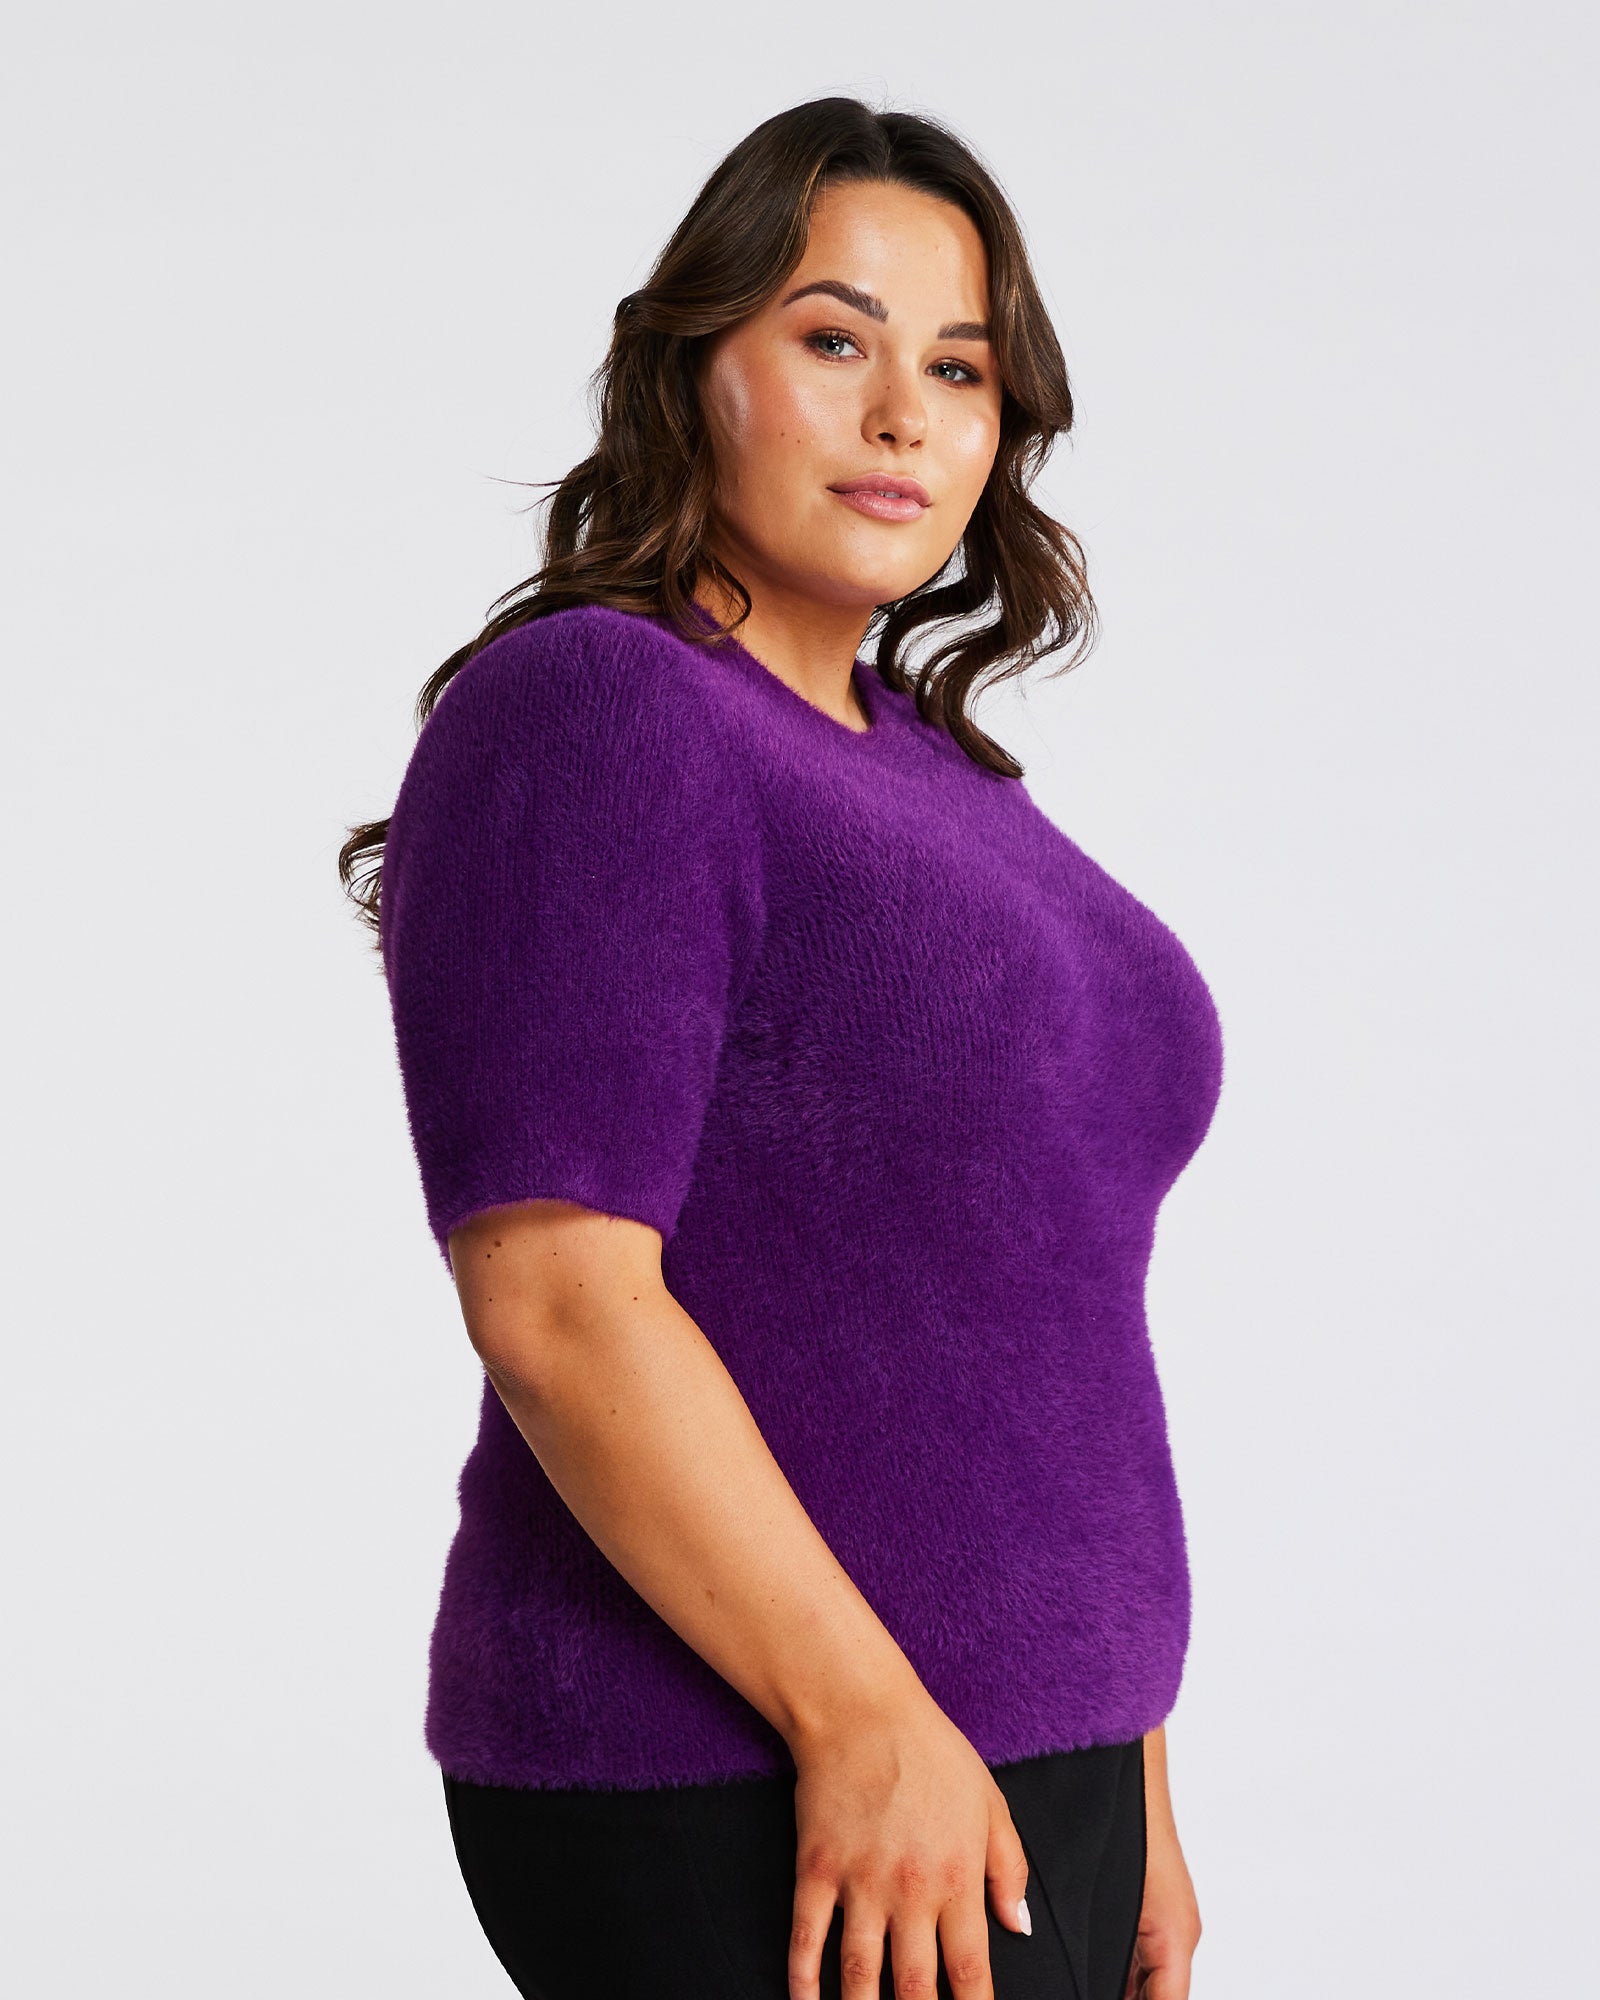 A woman wearing the Estelle Nora Fuzzy Purple Short-Sleeved Sweater and black pants.